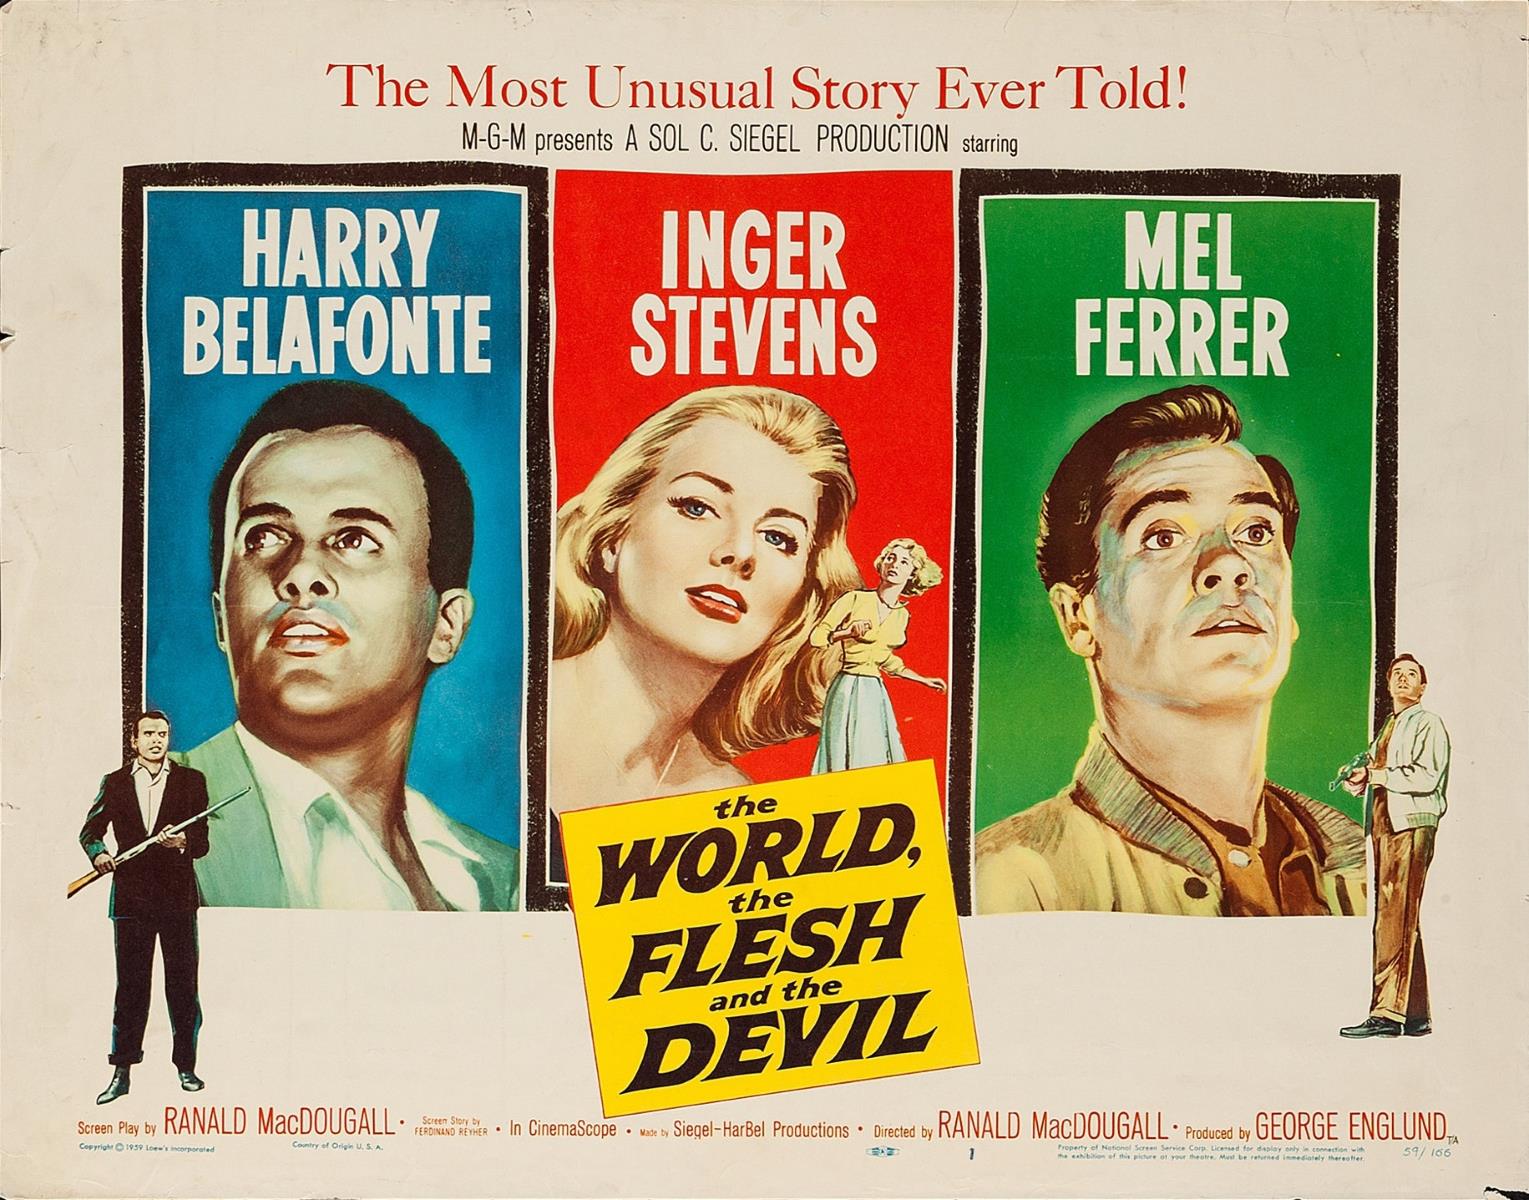 46-facts-about-the-movie-flesh-and-the-devil